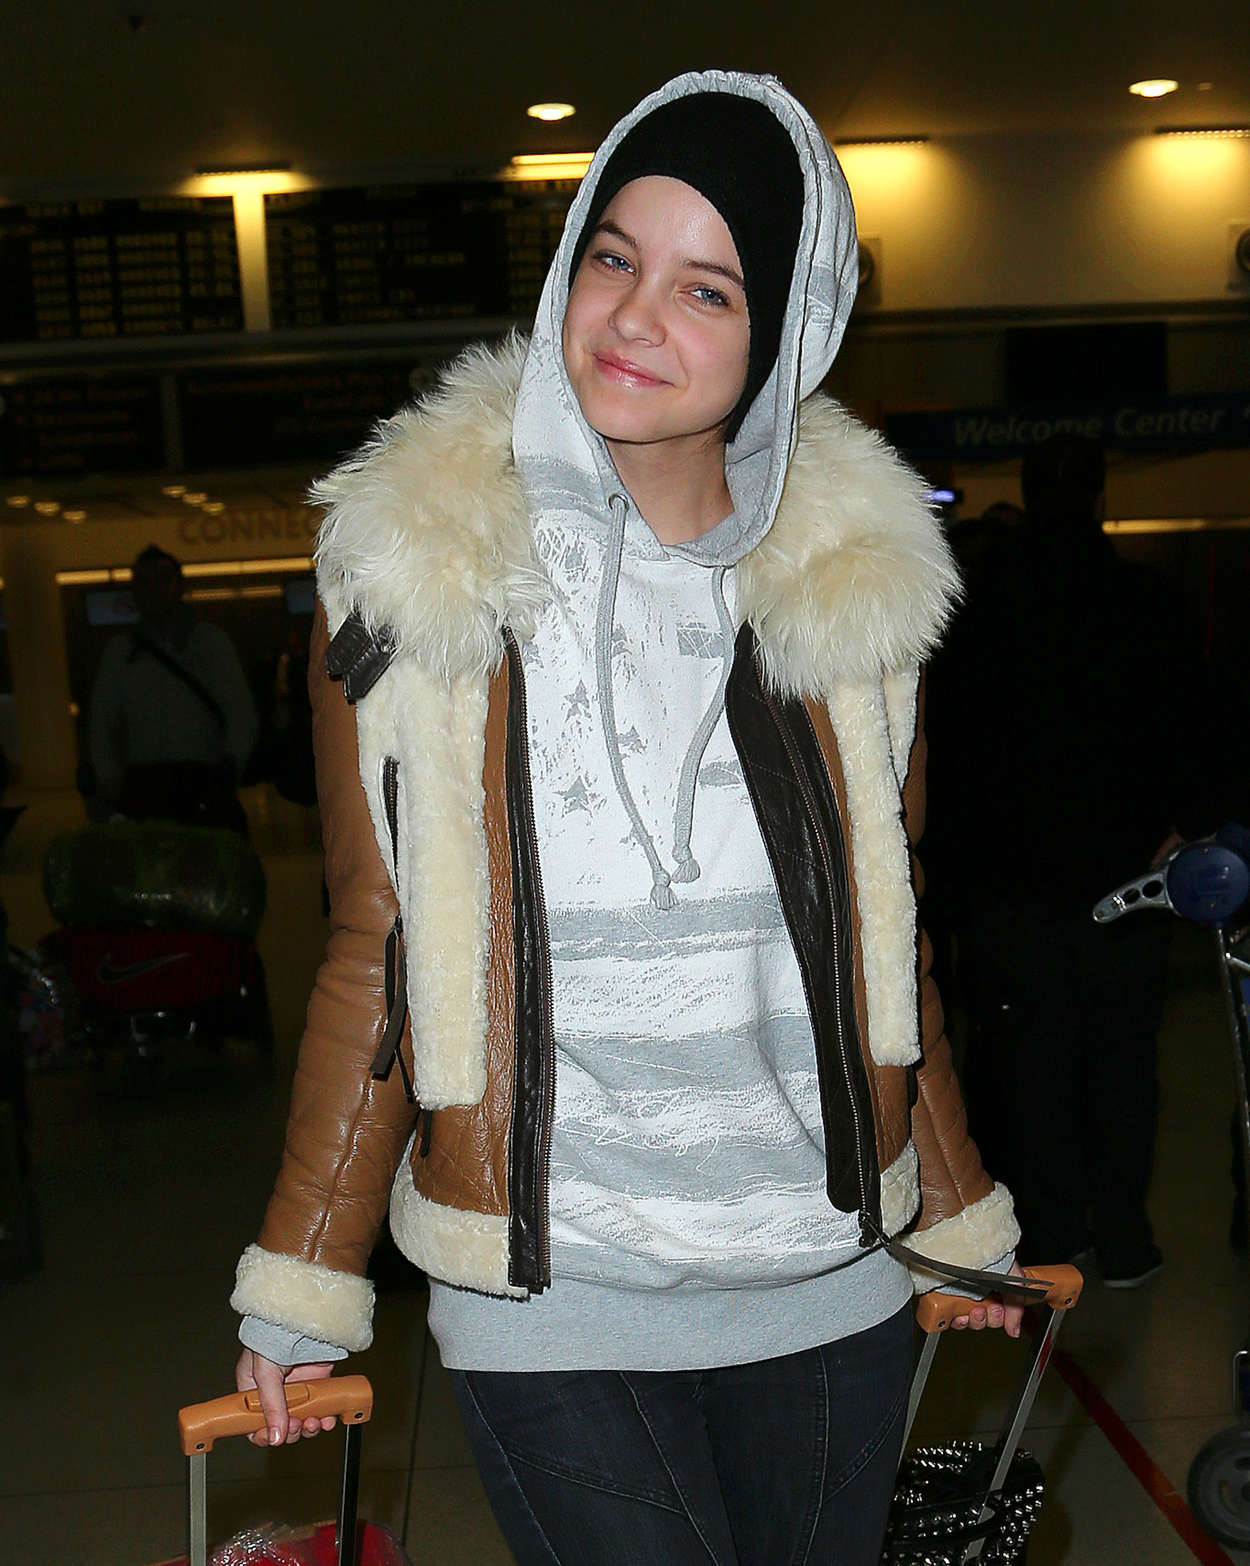 Barbara Palvin In jeans arrives at JFK Airport in NYC